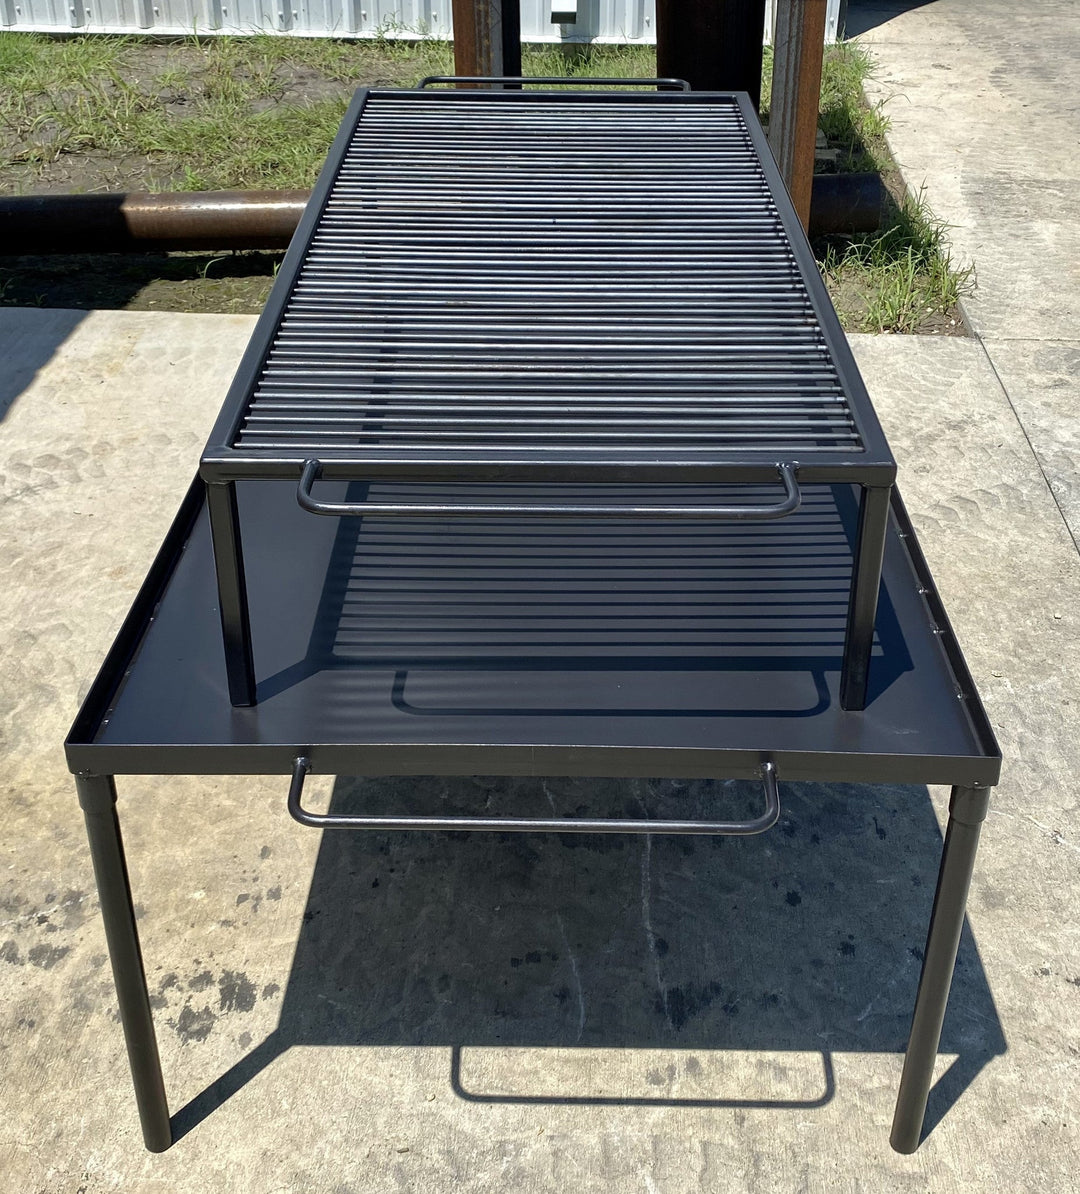 Asado Firetable and Grill - My Store